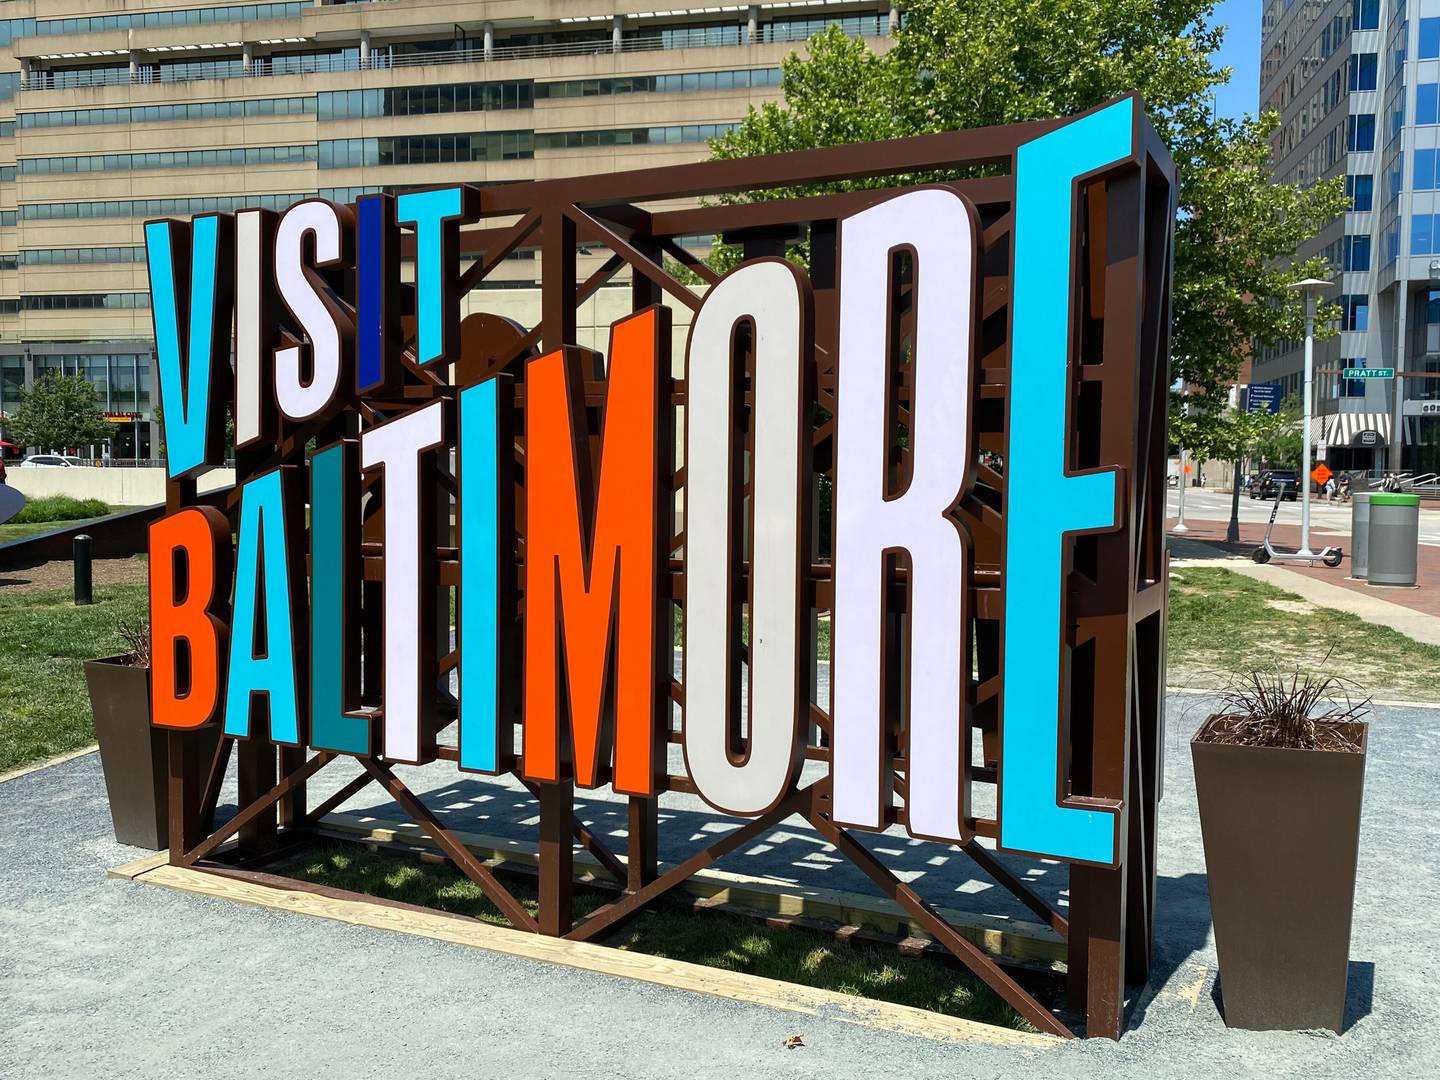 A view of the "Visit Baltimore" sign by Inner Harbor.